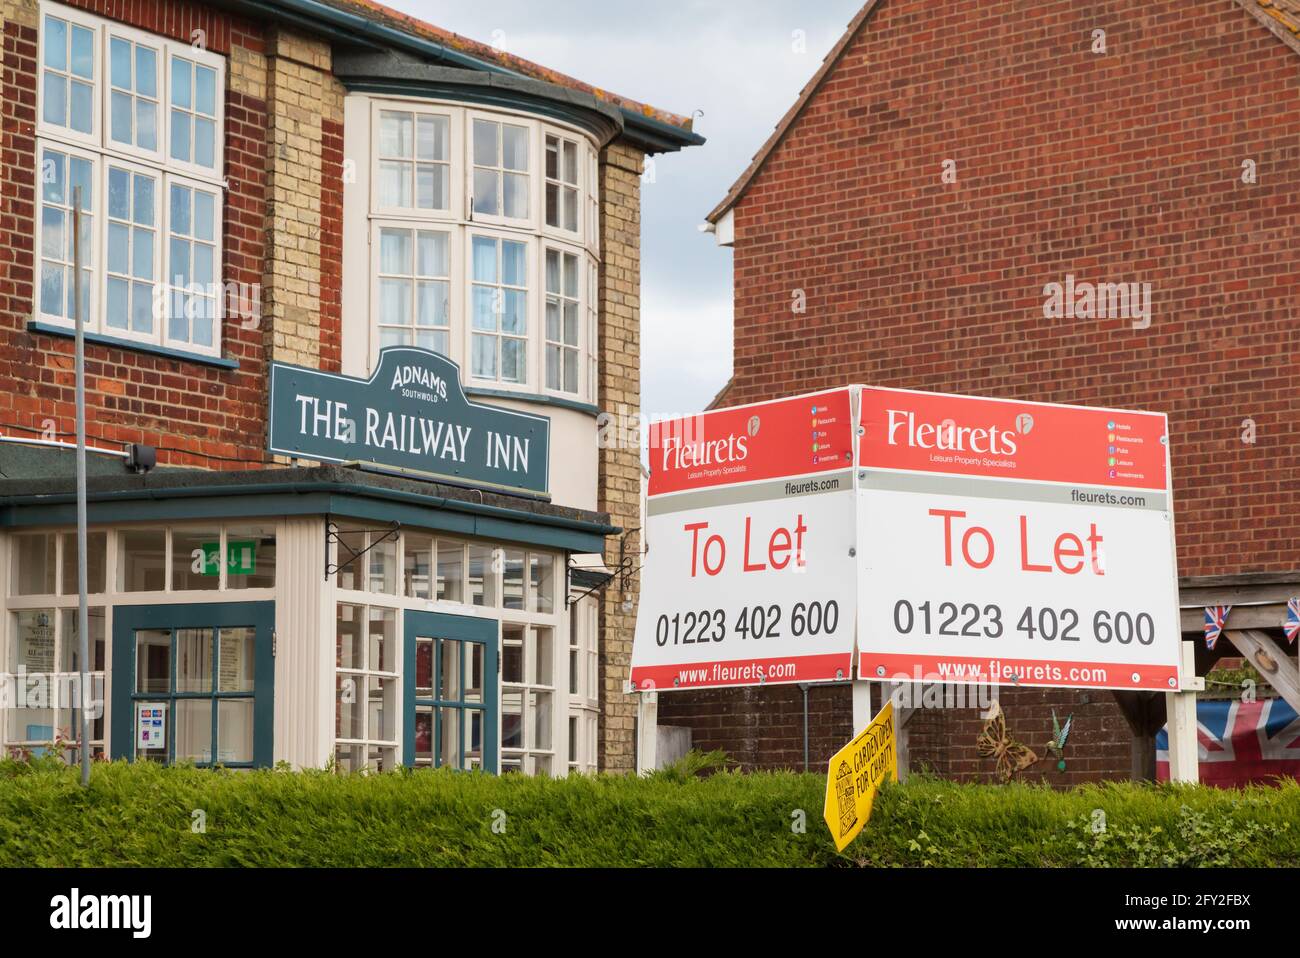 A To Let sign outside the Railway Inn pub in Aldeburgh, Suffolk. UK Stock Photo